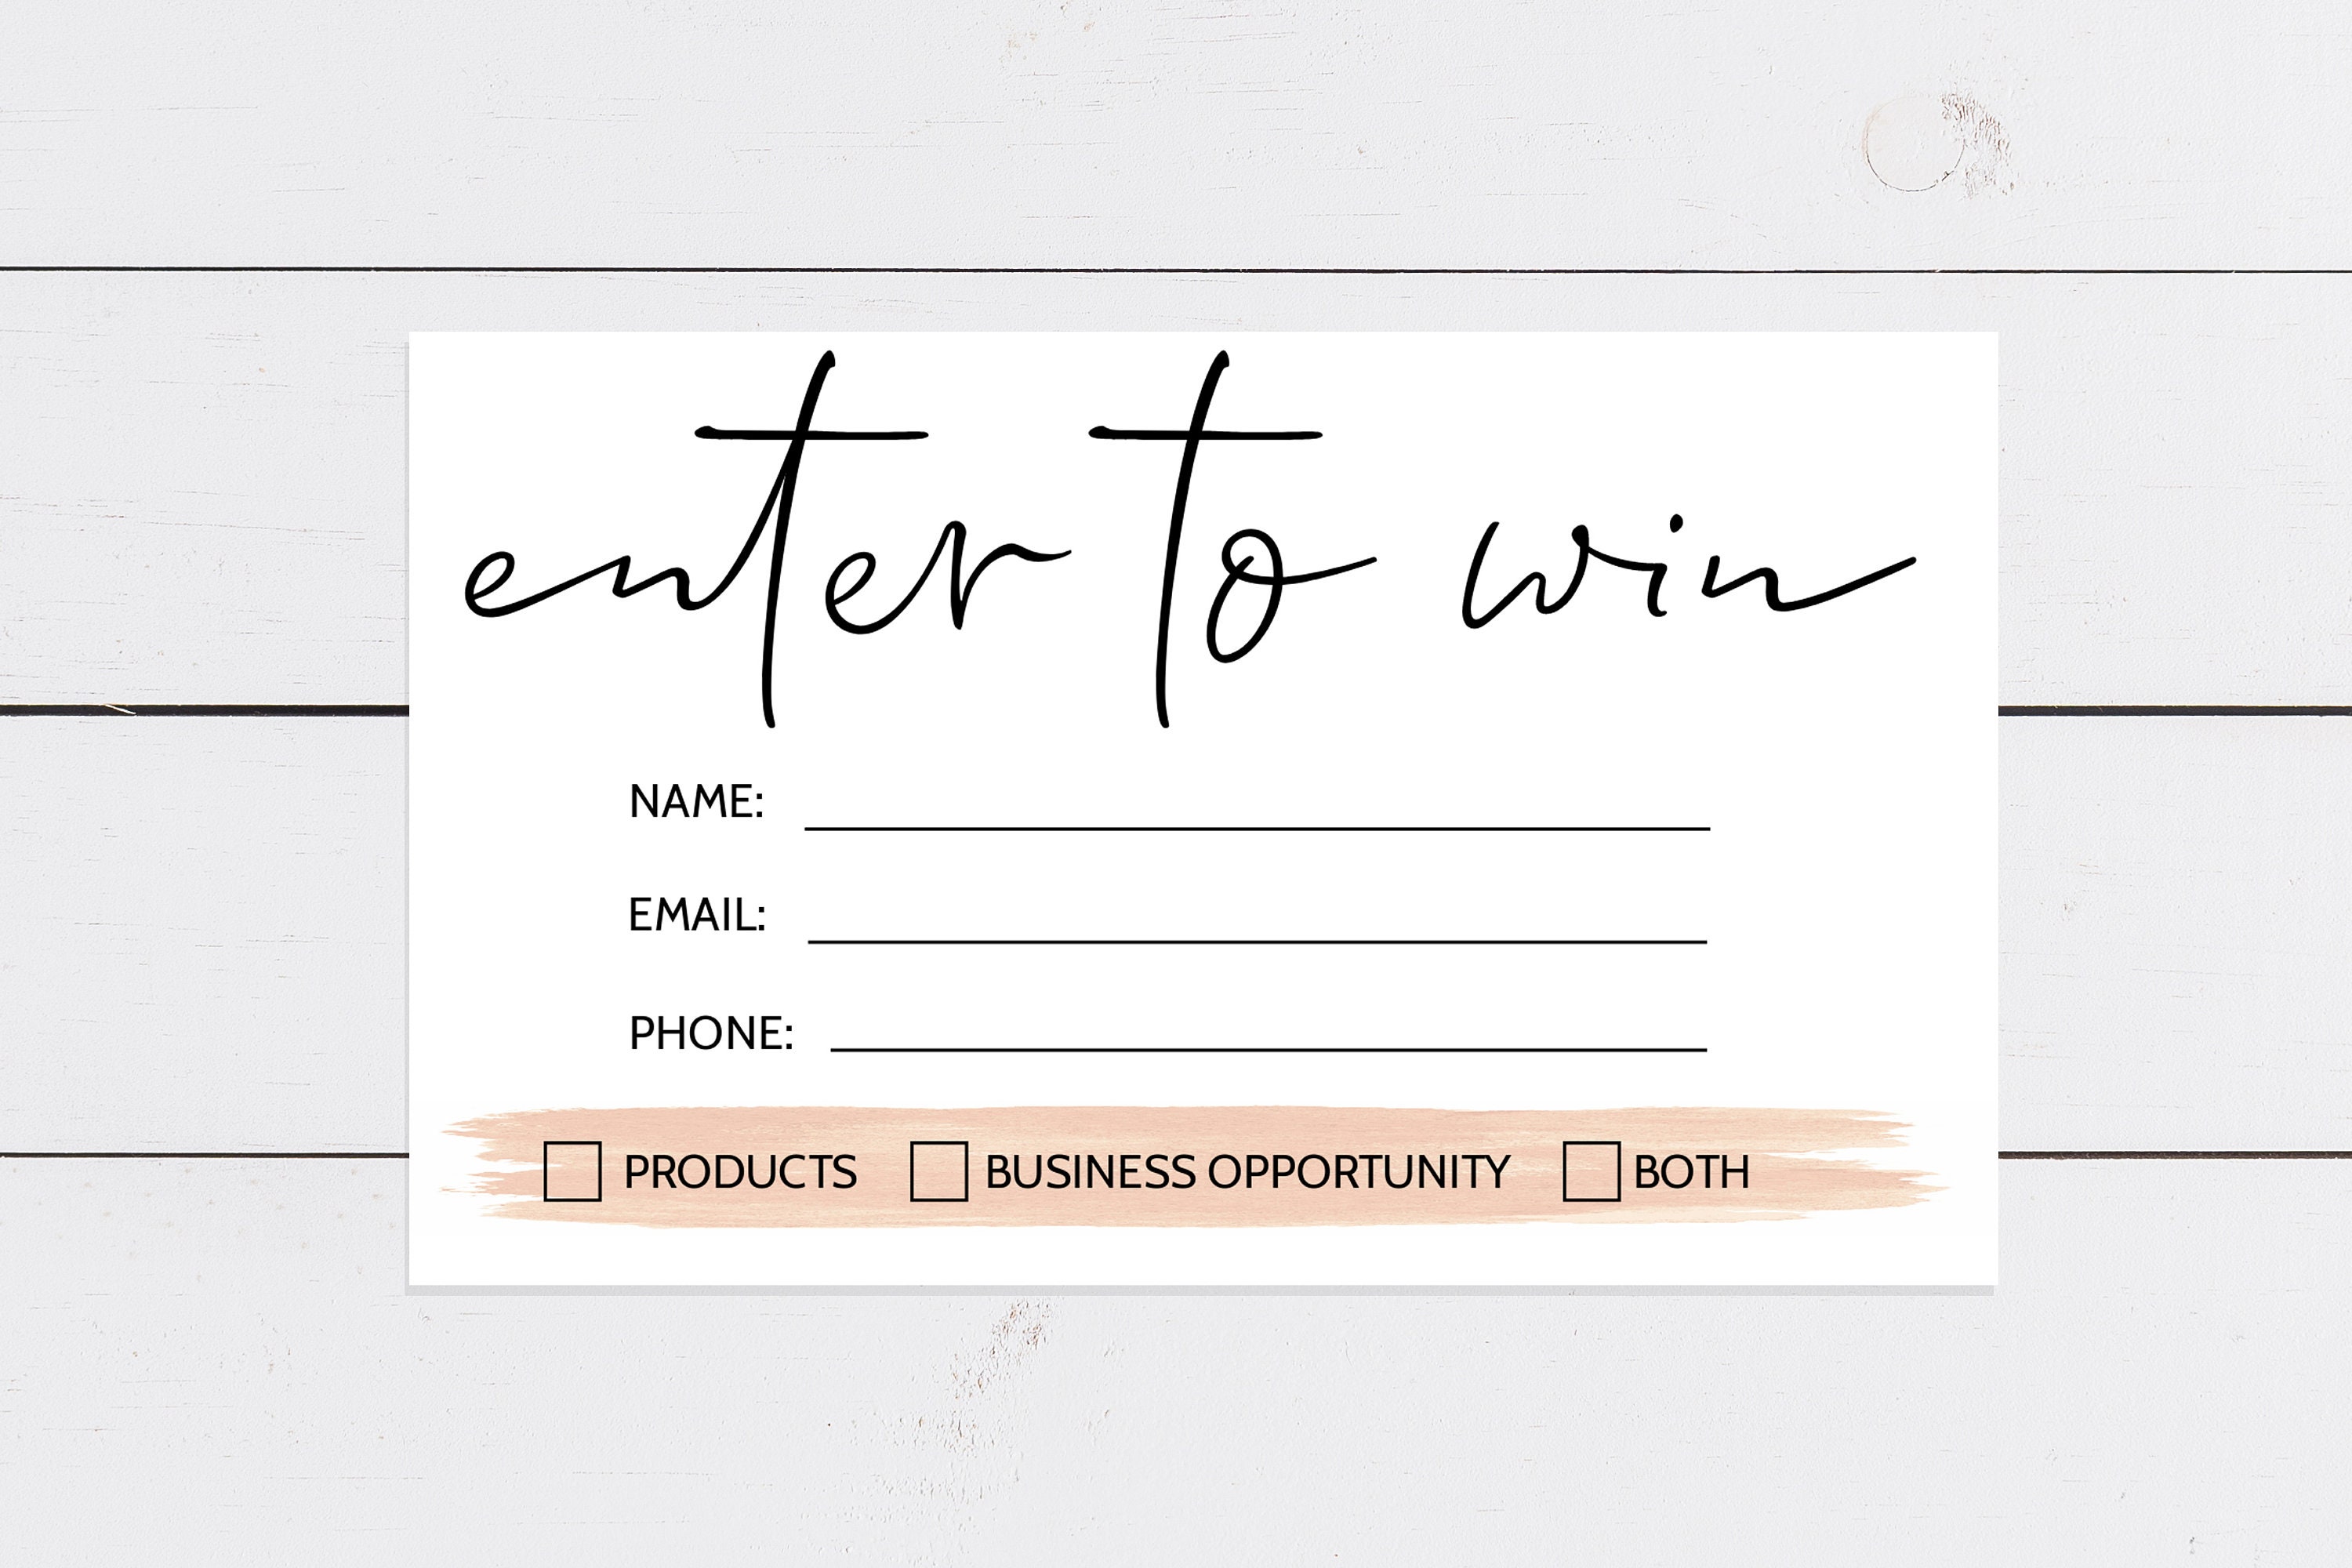 raffle-entry-form-template-unique-door-prize-drawing-template-at